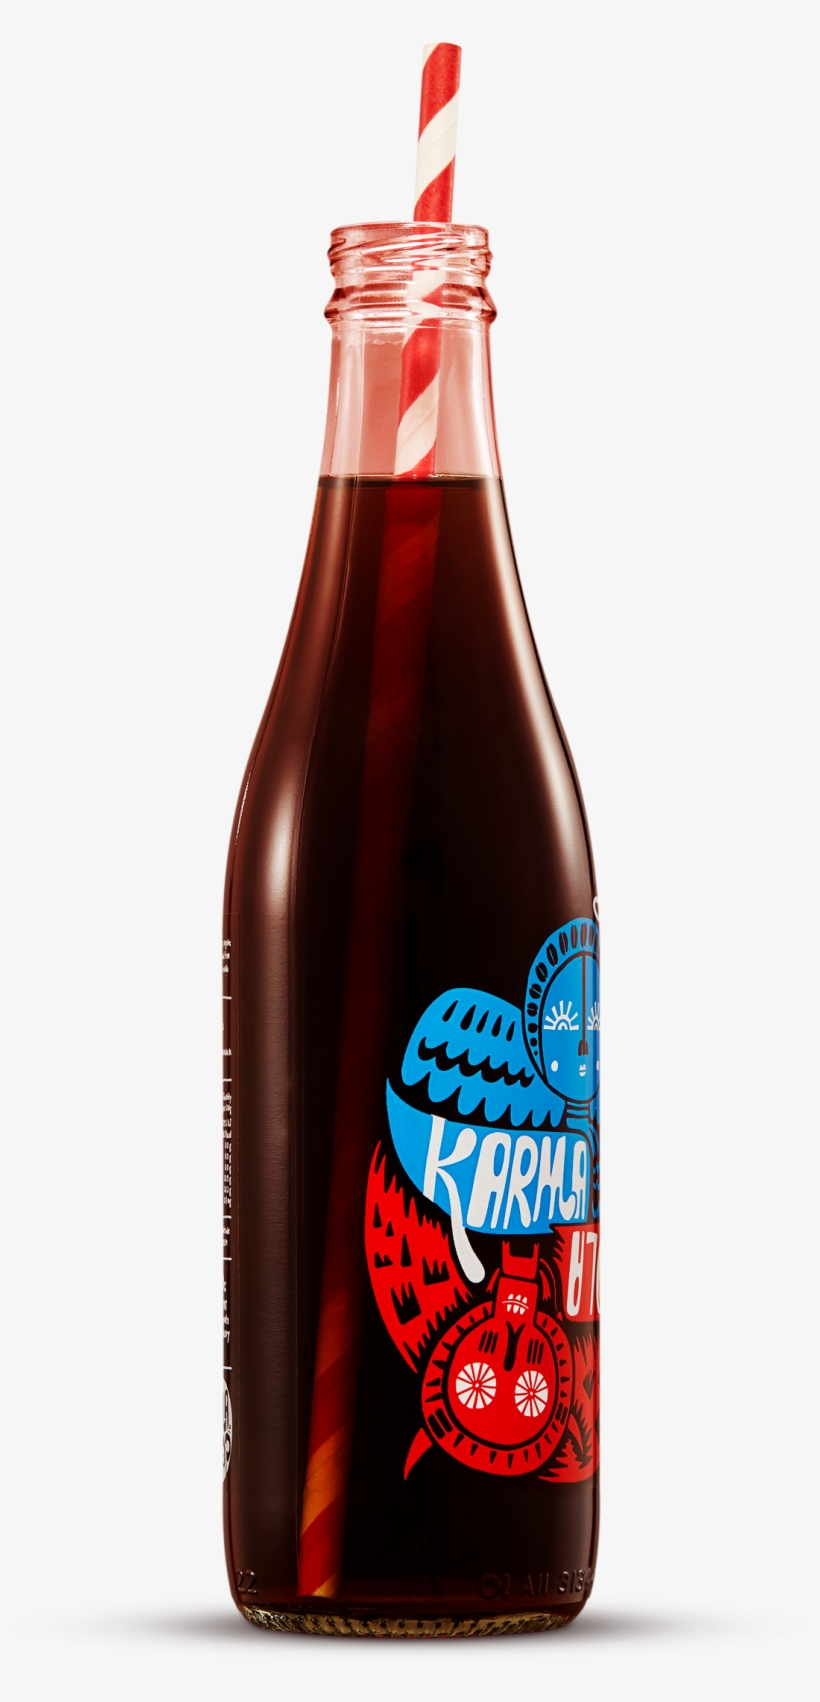 Less Sugar Than Most Other Fizzy Drinks - Carbonated Soft Drinks, transparent png #3638139